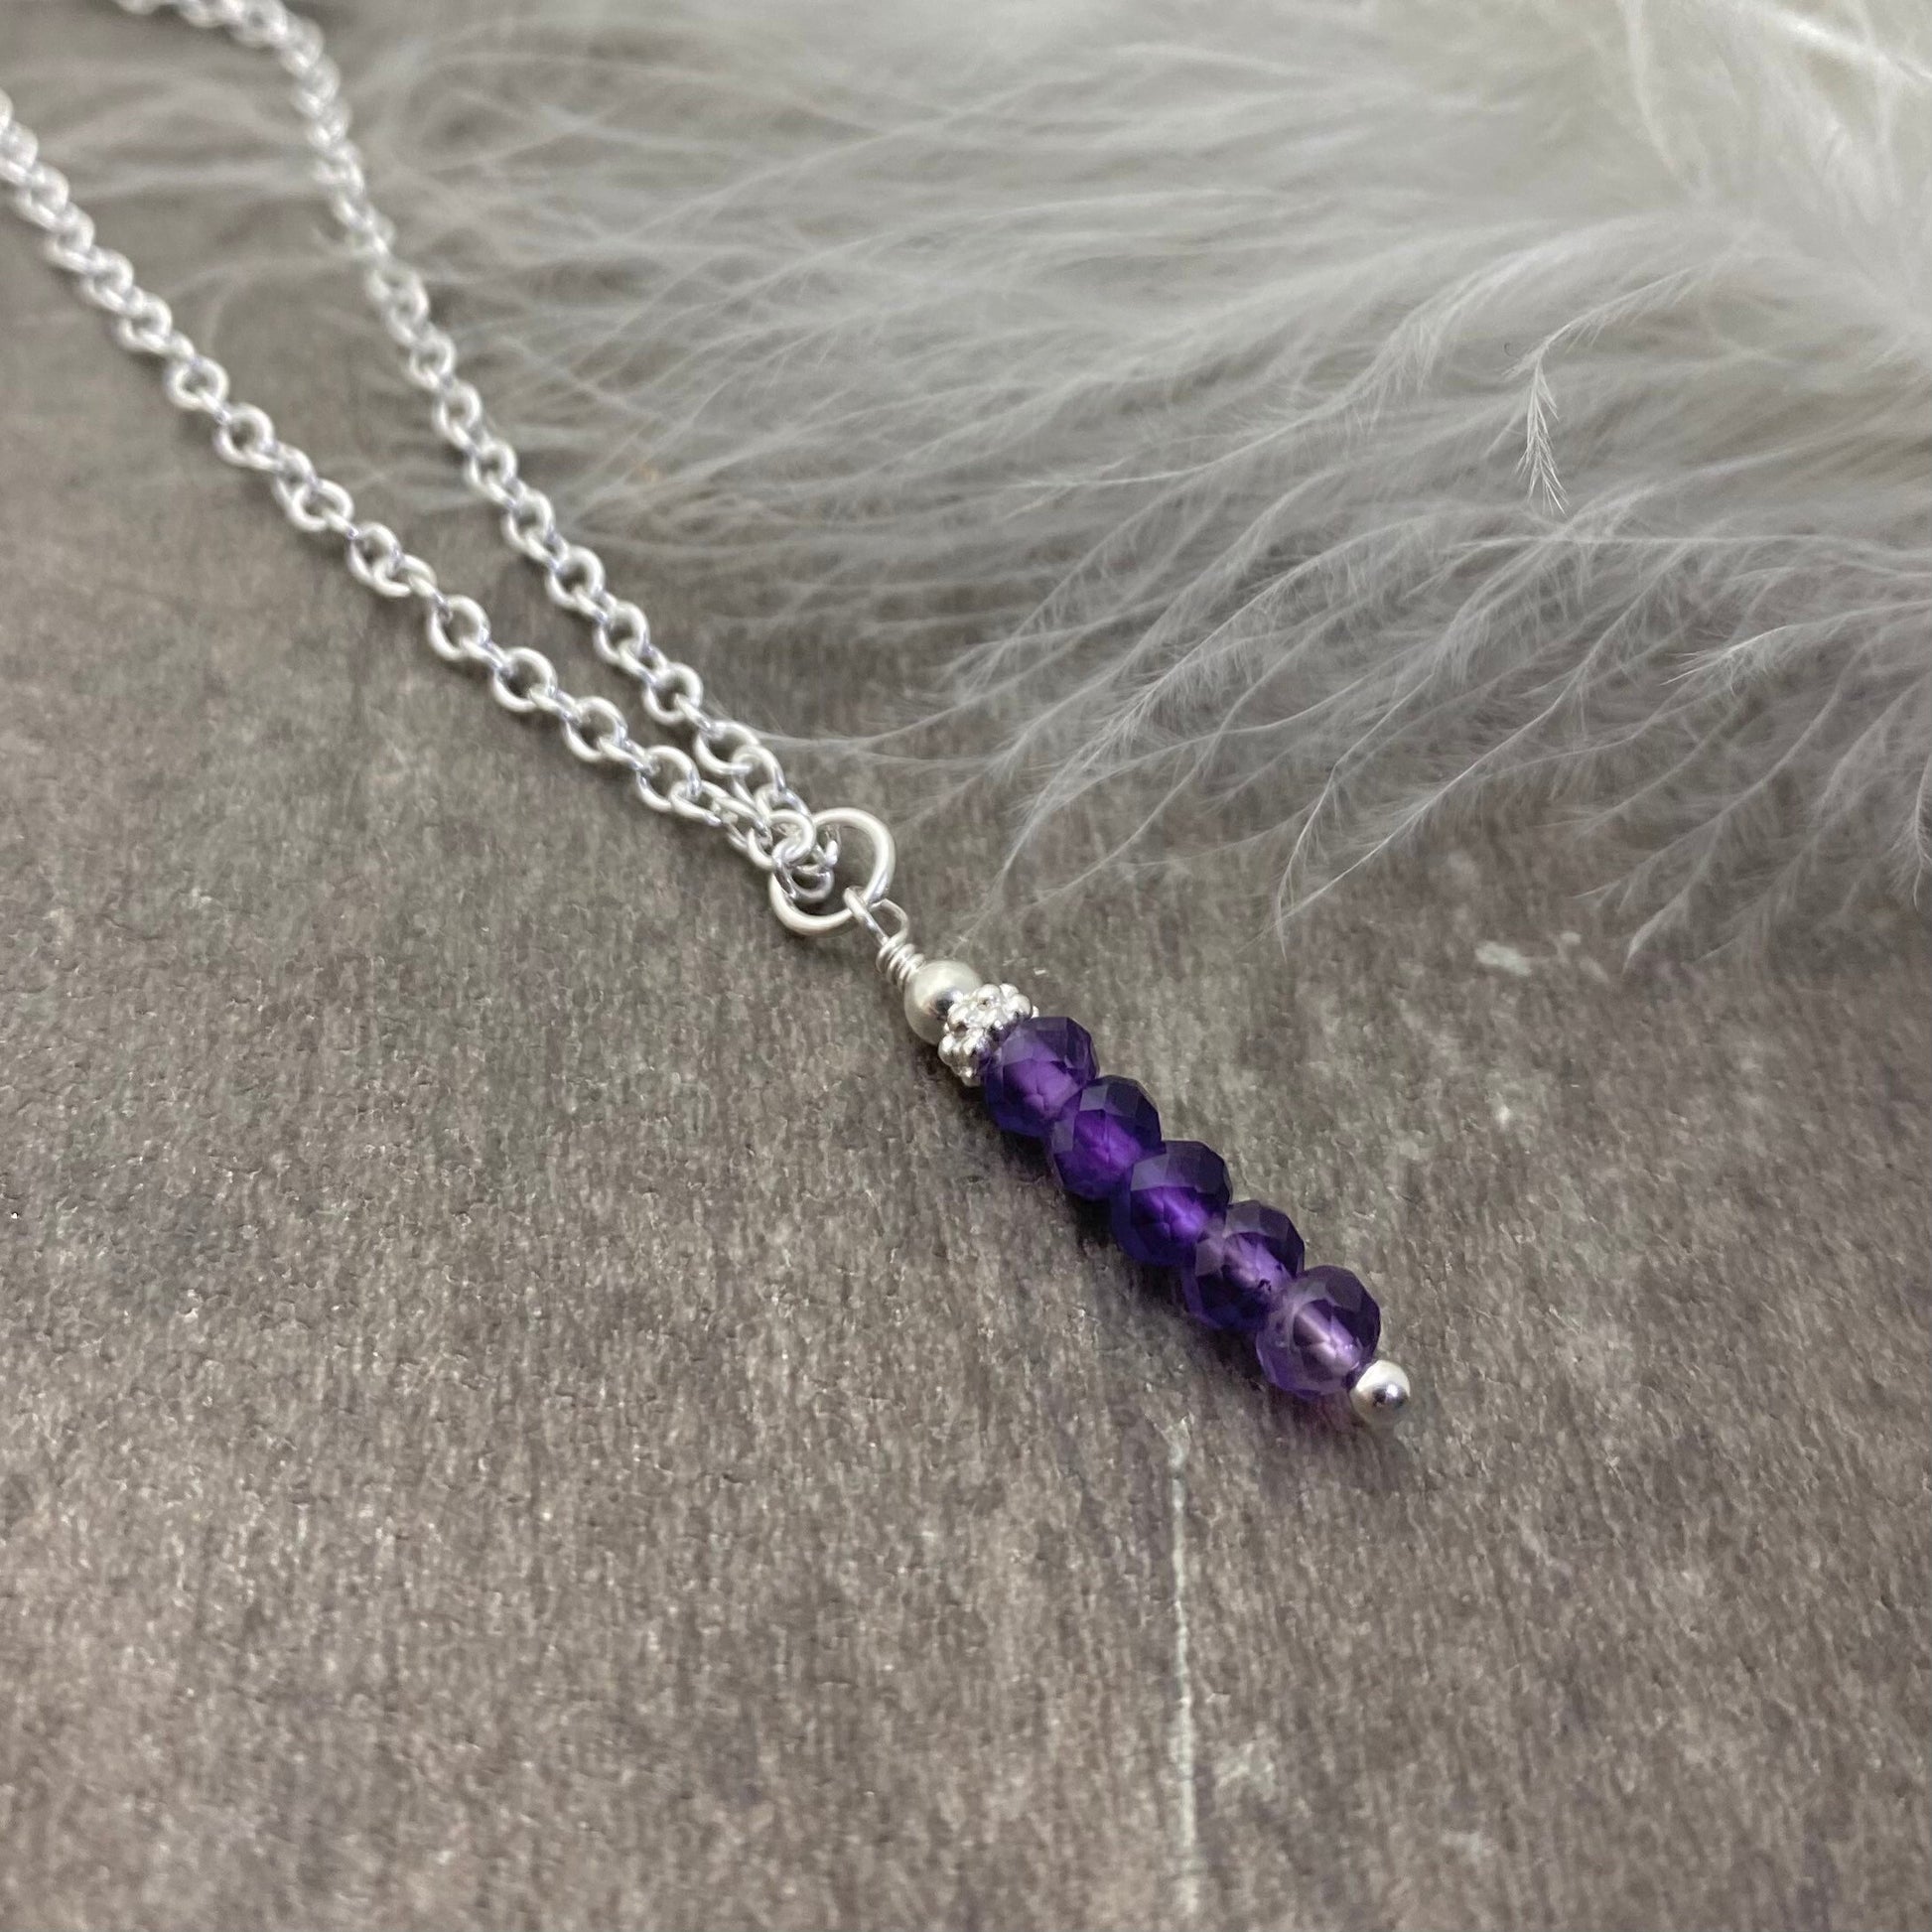 Dainty Amethyst necklace, February birthstone, sterling silver faceted pendant gemstone necklace